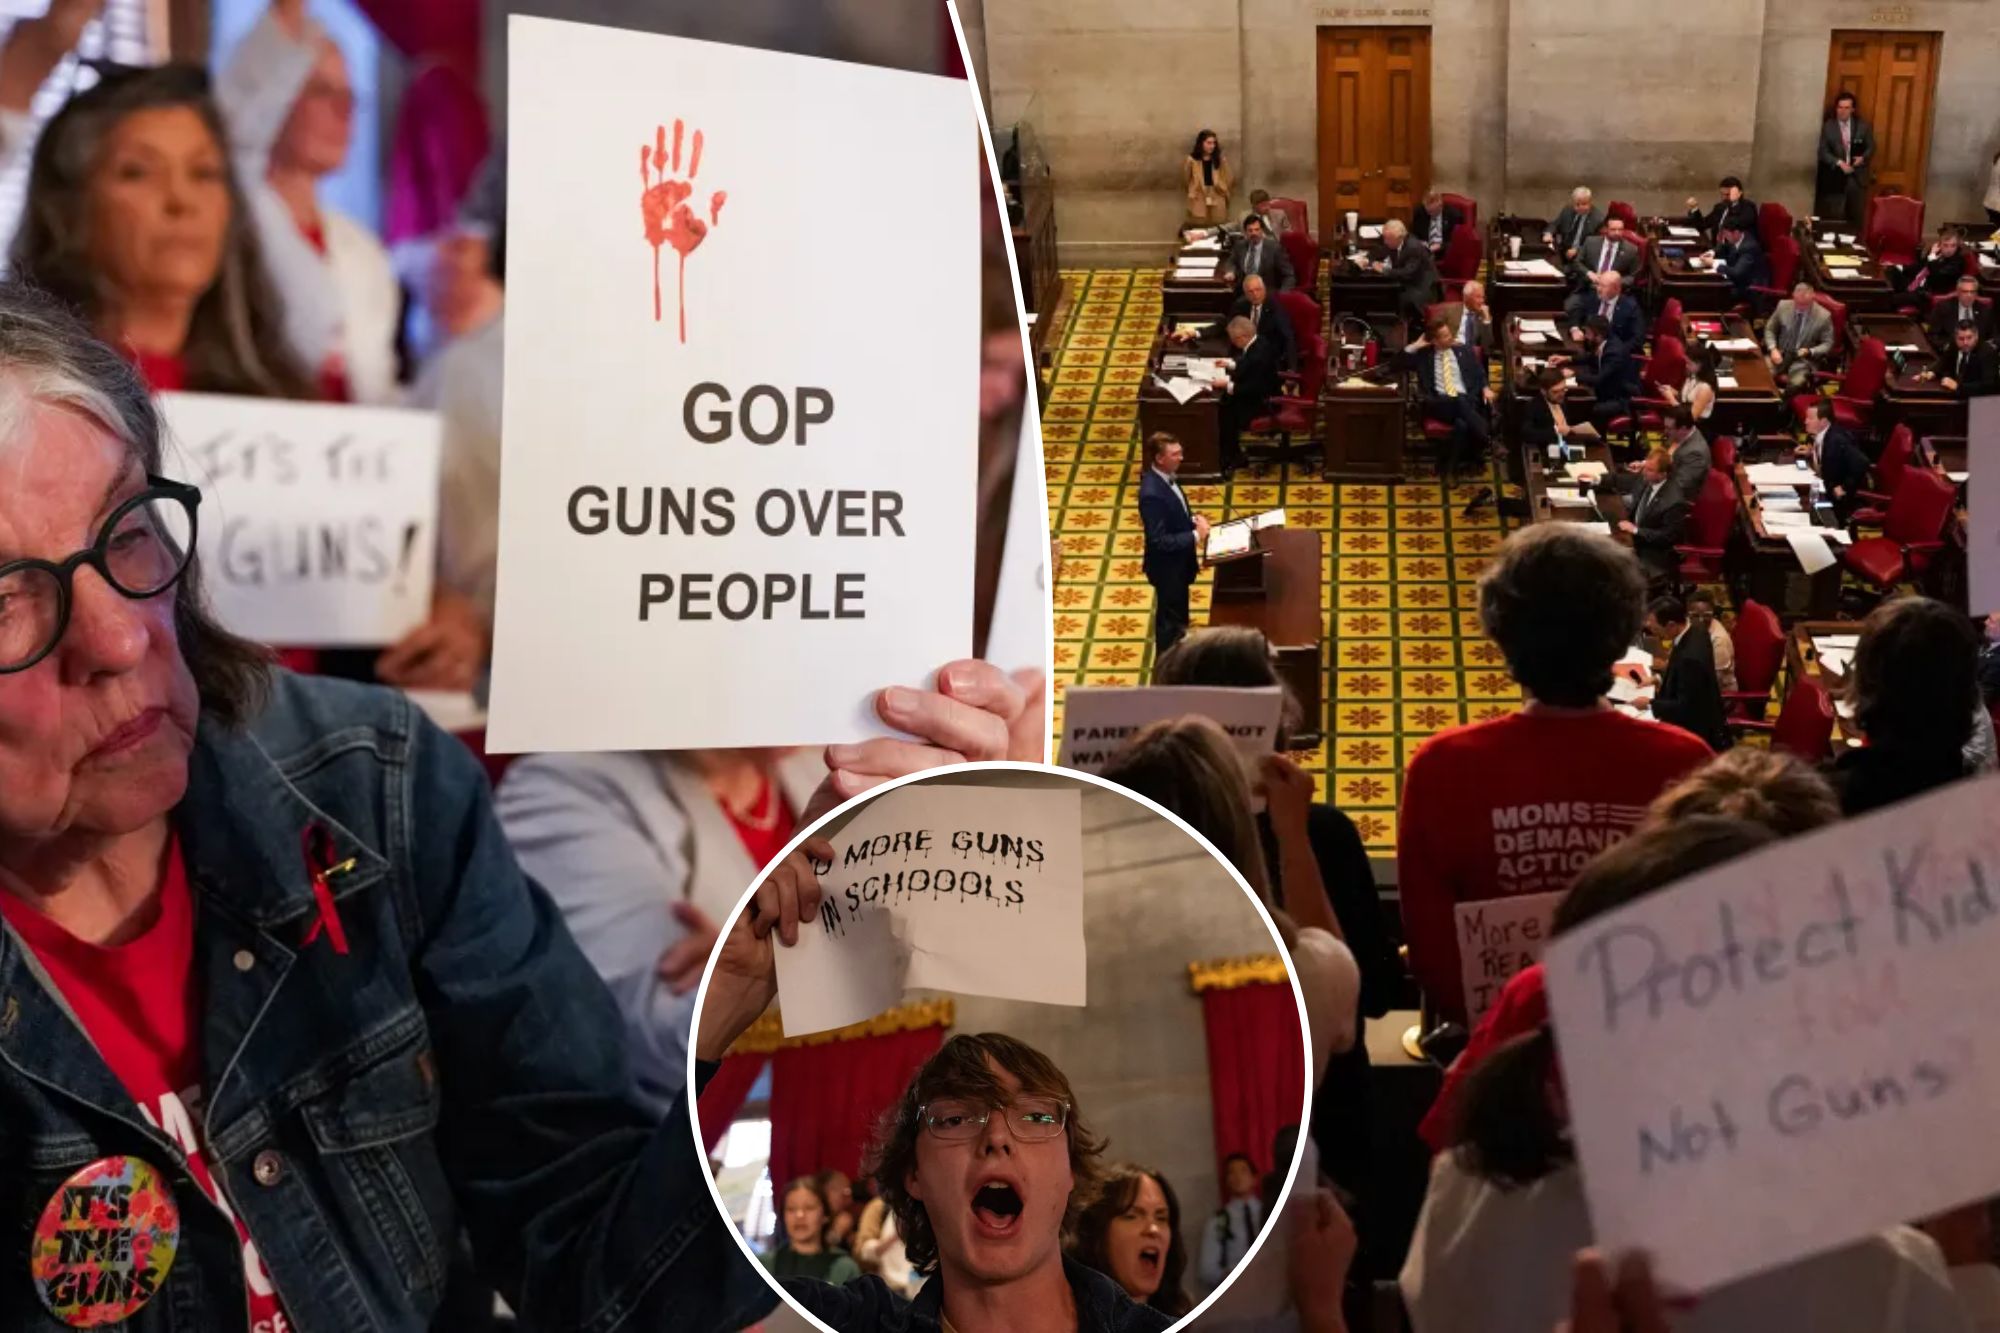 Tennessee lawmakers on Tuesday passed a bill that would allow the state's teachers to carry concealed handguns at school, as protesters yelled their opposition from the gallery.